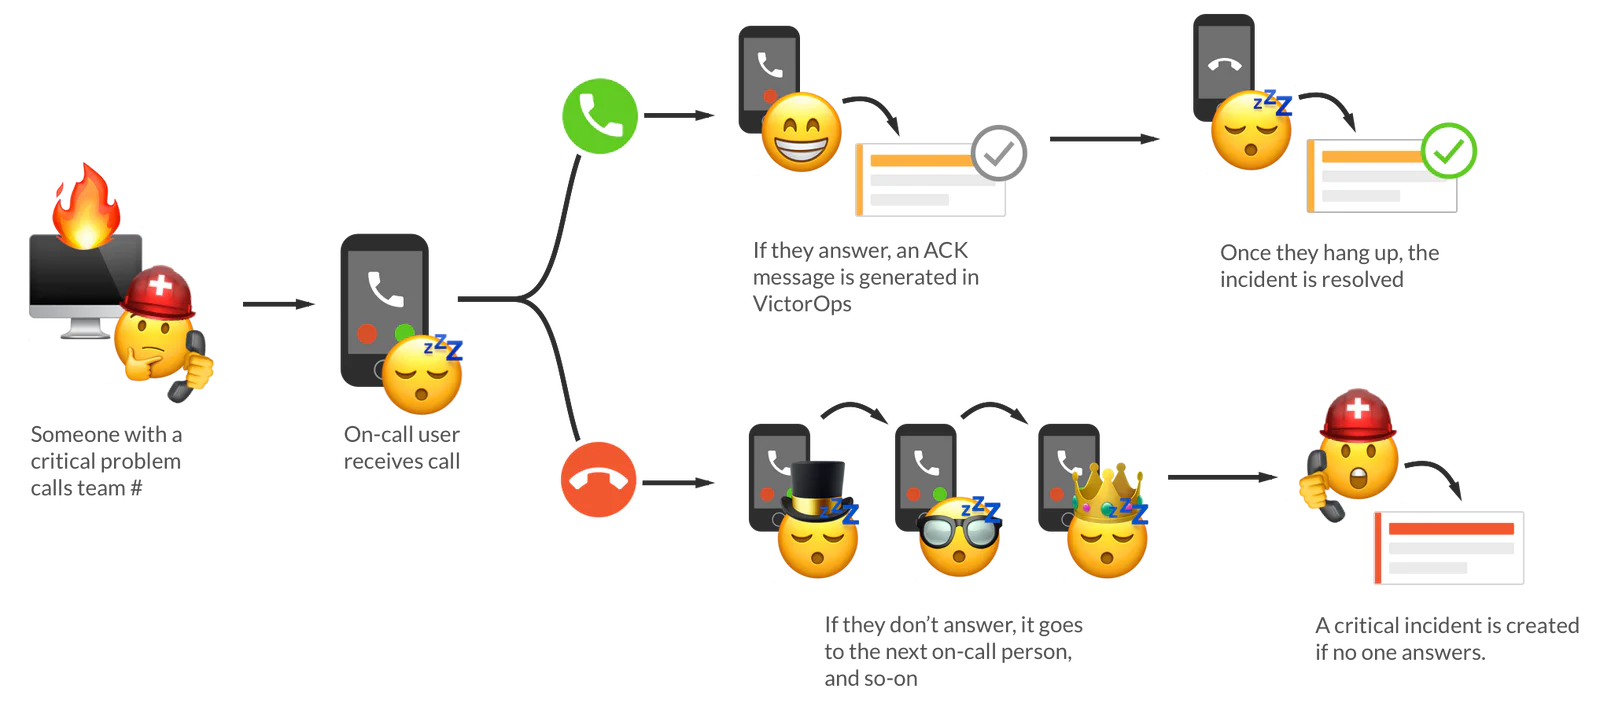 Live call routing process